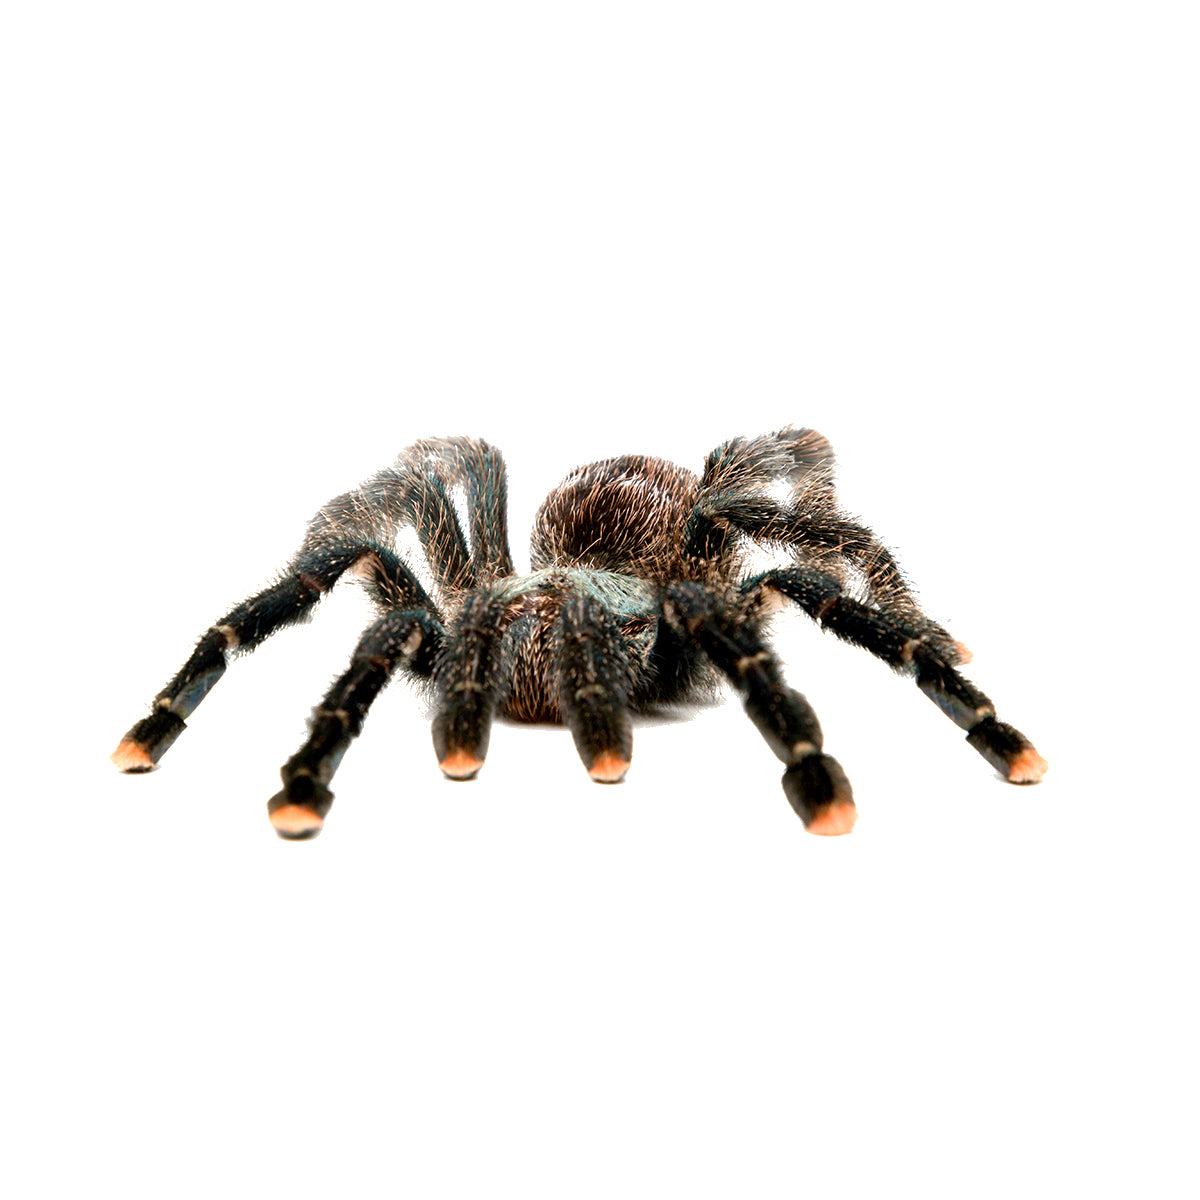 The Fascinating World of Tarantulas and Quick Facts